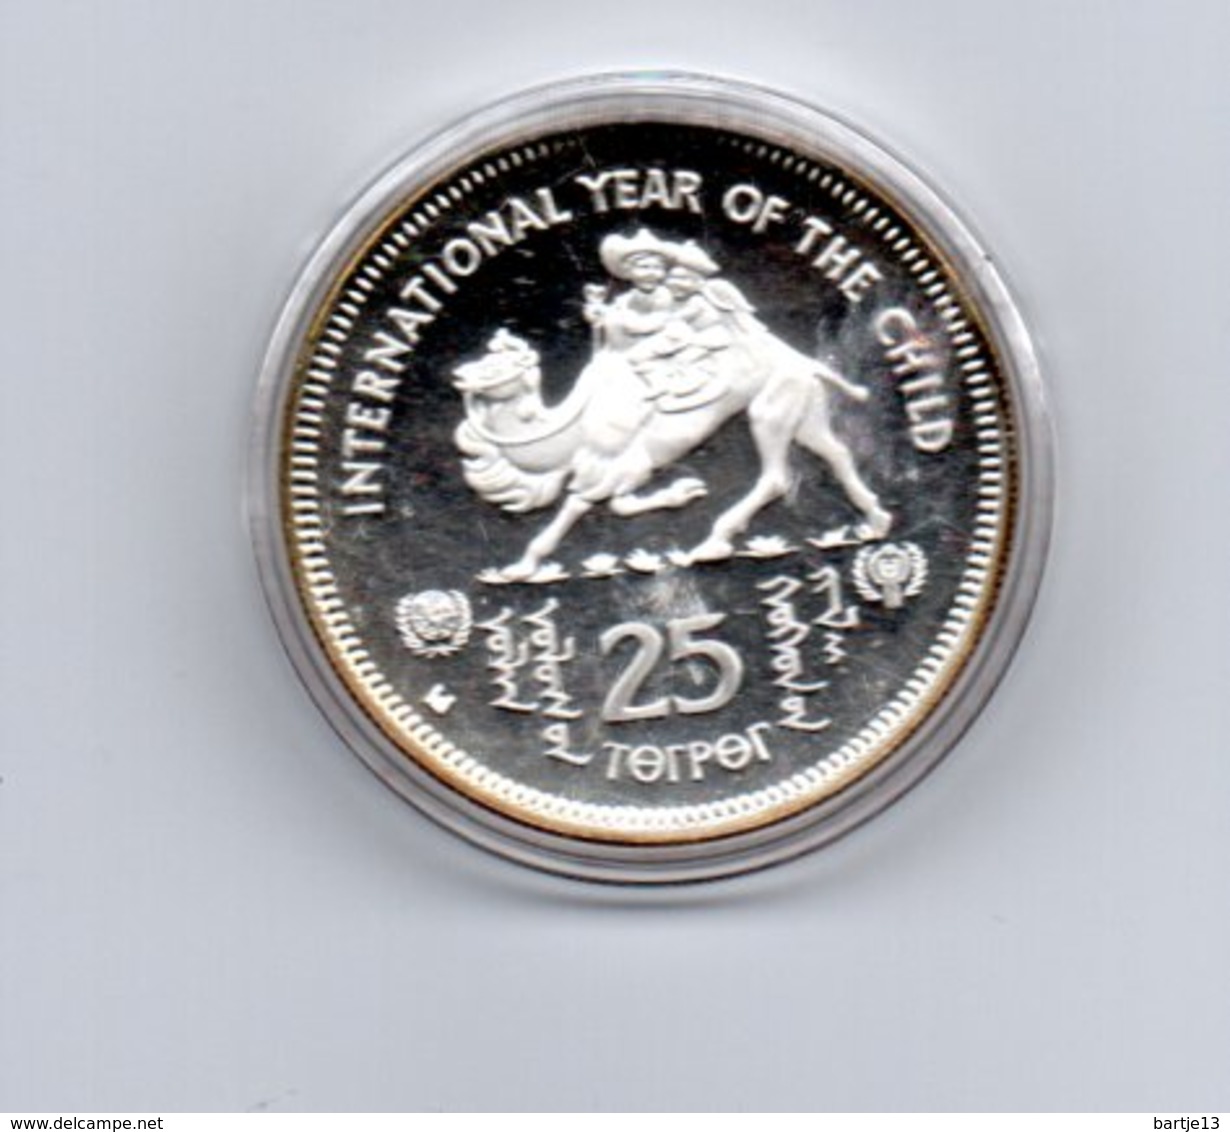 MONGOLIE 25 TUGRIK 1980 ZILVER PROOF YEAR OF THE CHILD CAMEL KAMEEL DAMAGE ONLY ON CAPSEL - Mongolie